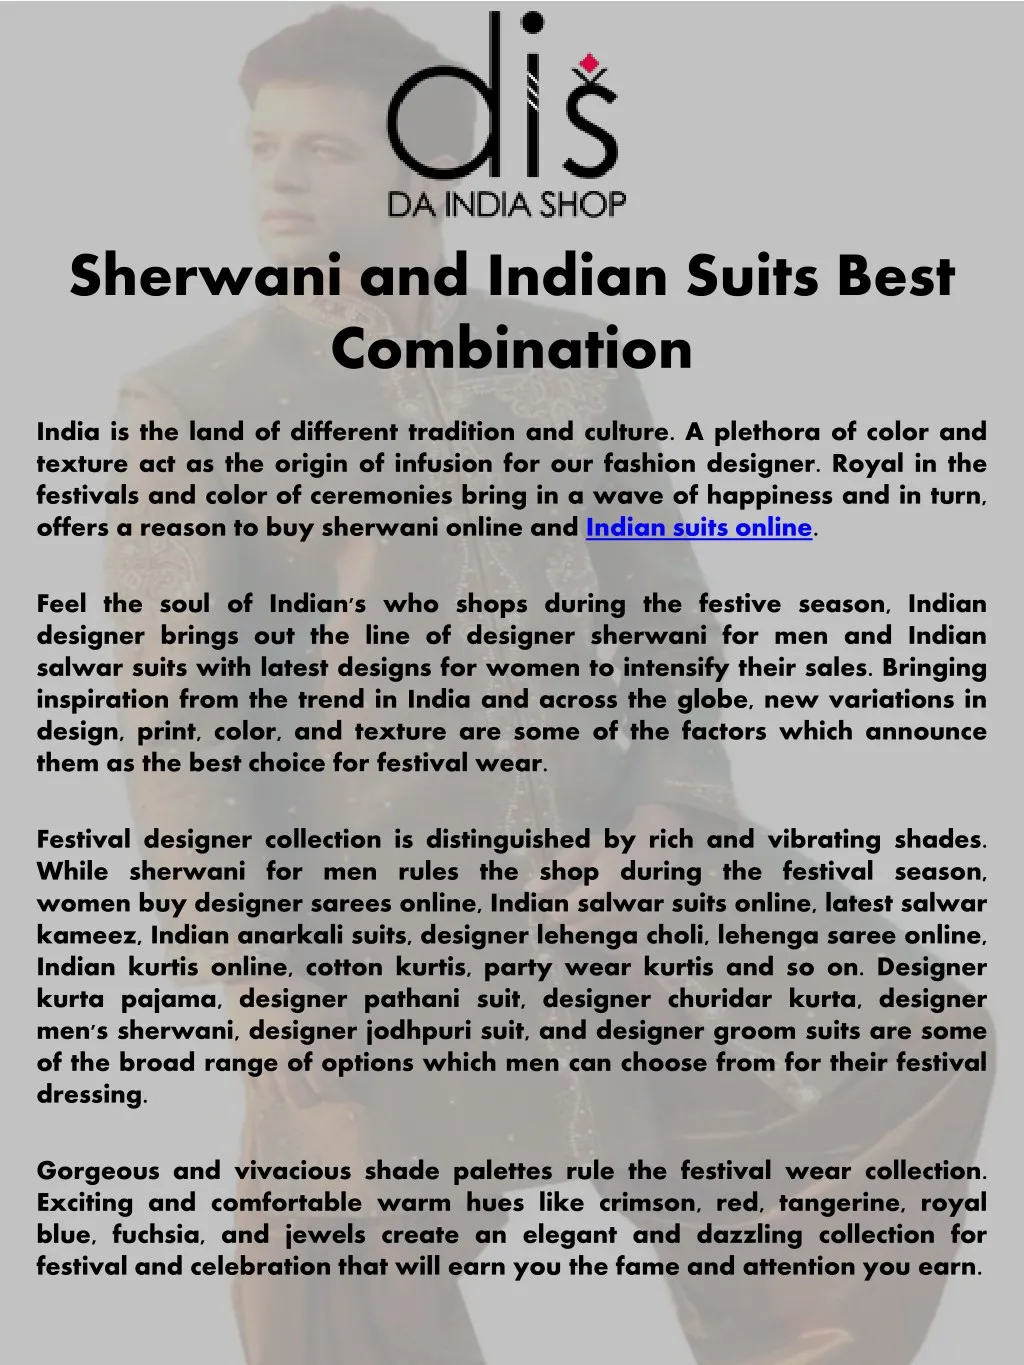 sherwani and indian suits best combination